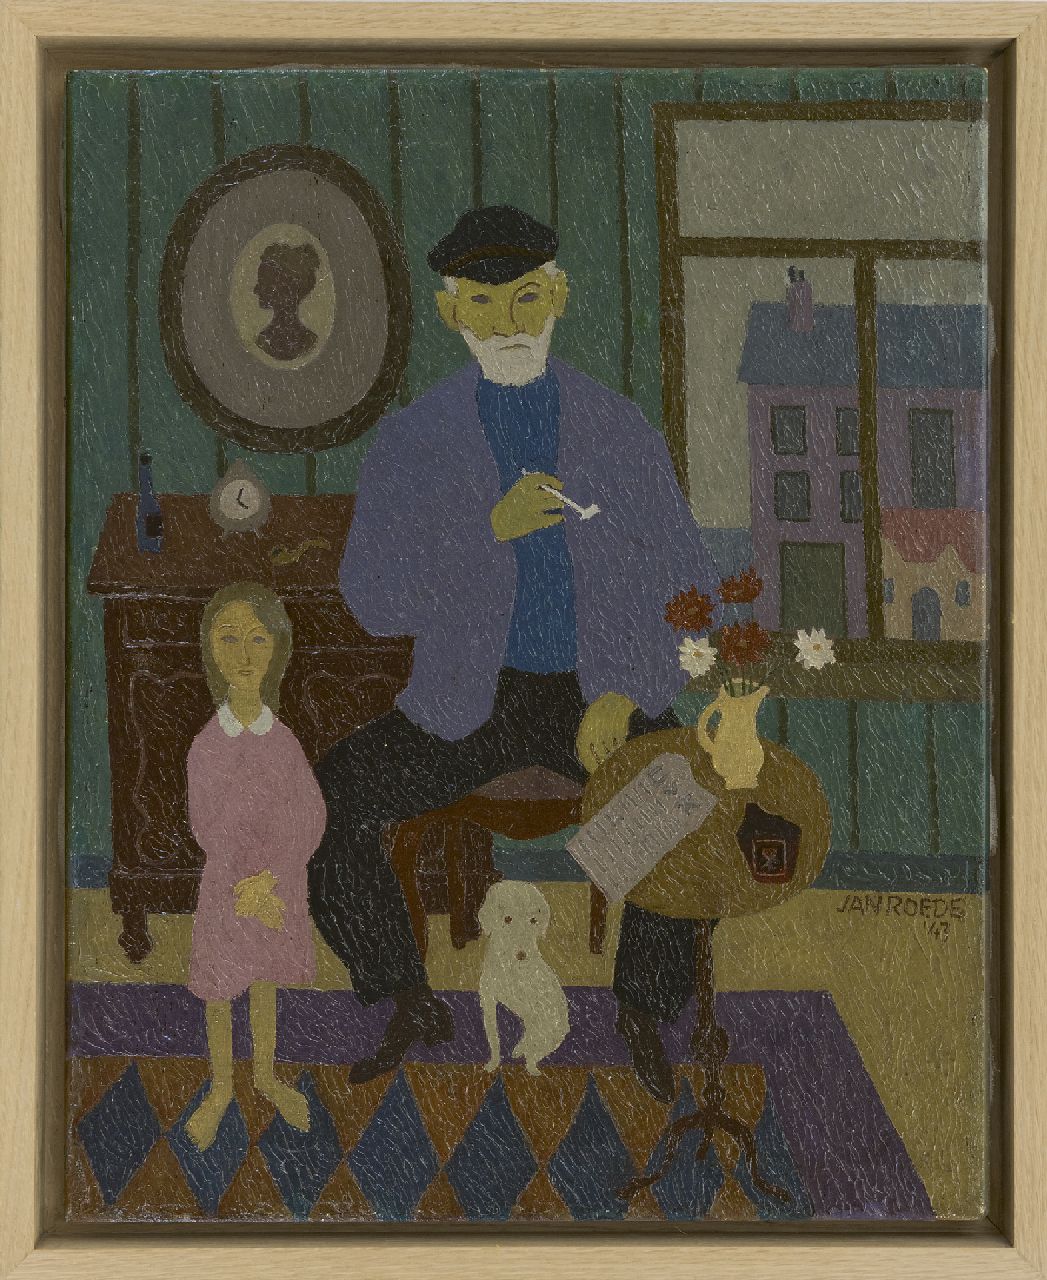 Roëde J.  | Jan Roëde | Paintings offered for sale | Grandfather and granddaughter, oil on canvas 50.5 x 40.4 cm, signed l.r. and dated '43